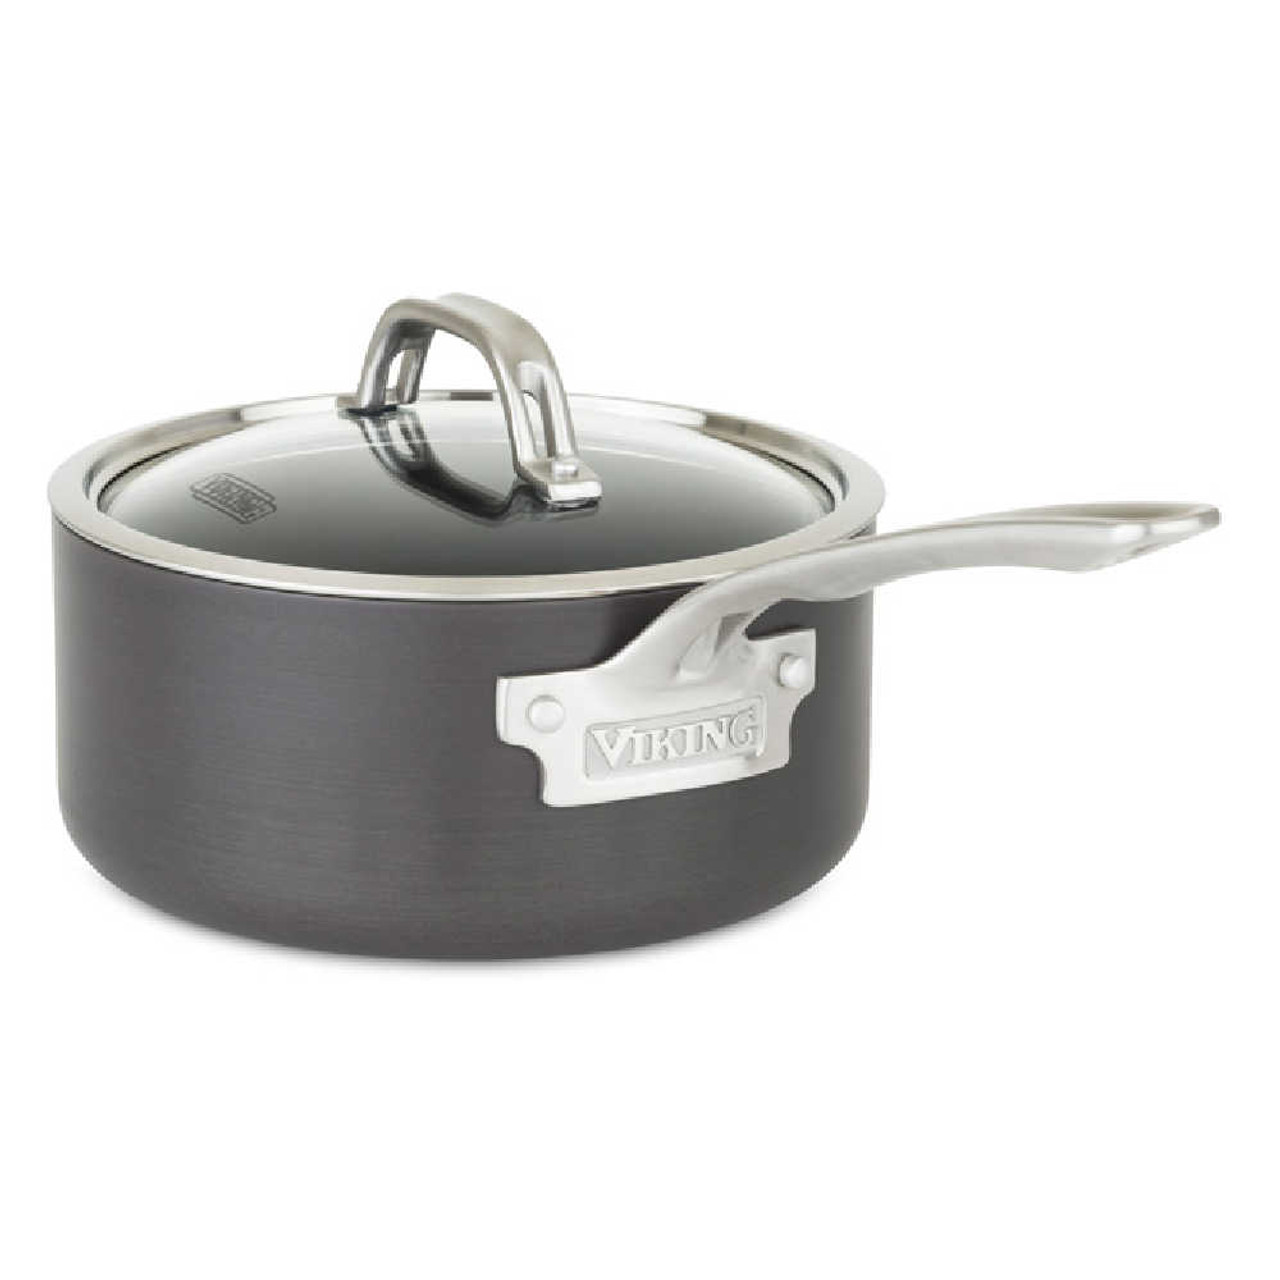 https://cdn11.bigcommerce.com/s-hccytny0od/images/stencil/1280x1280/products/4815/19713/Viking_Hard_Anodized_Nonstick_3-Quart_Sauce_Pan__35559.1656109051.jpg?c=2?imbypass=on